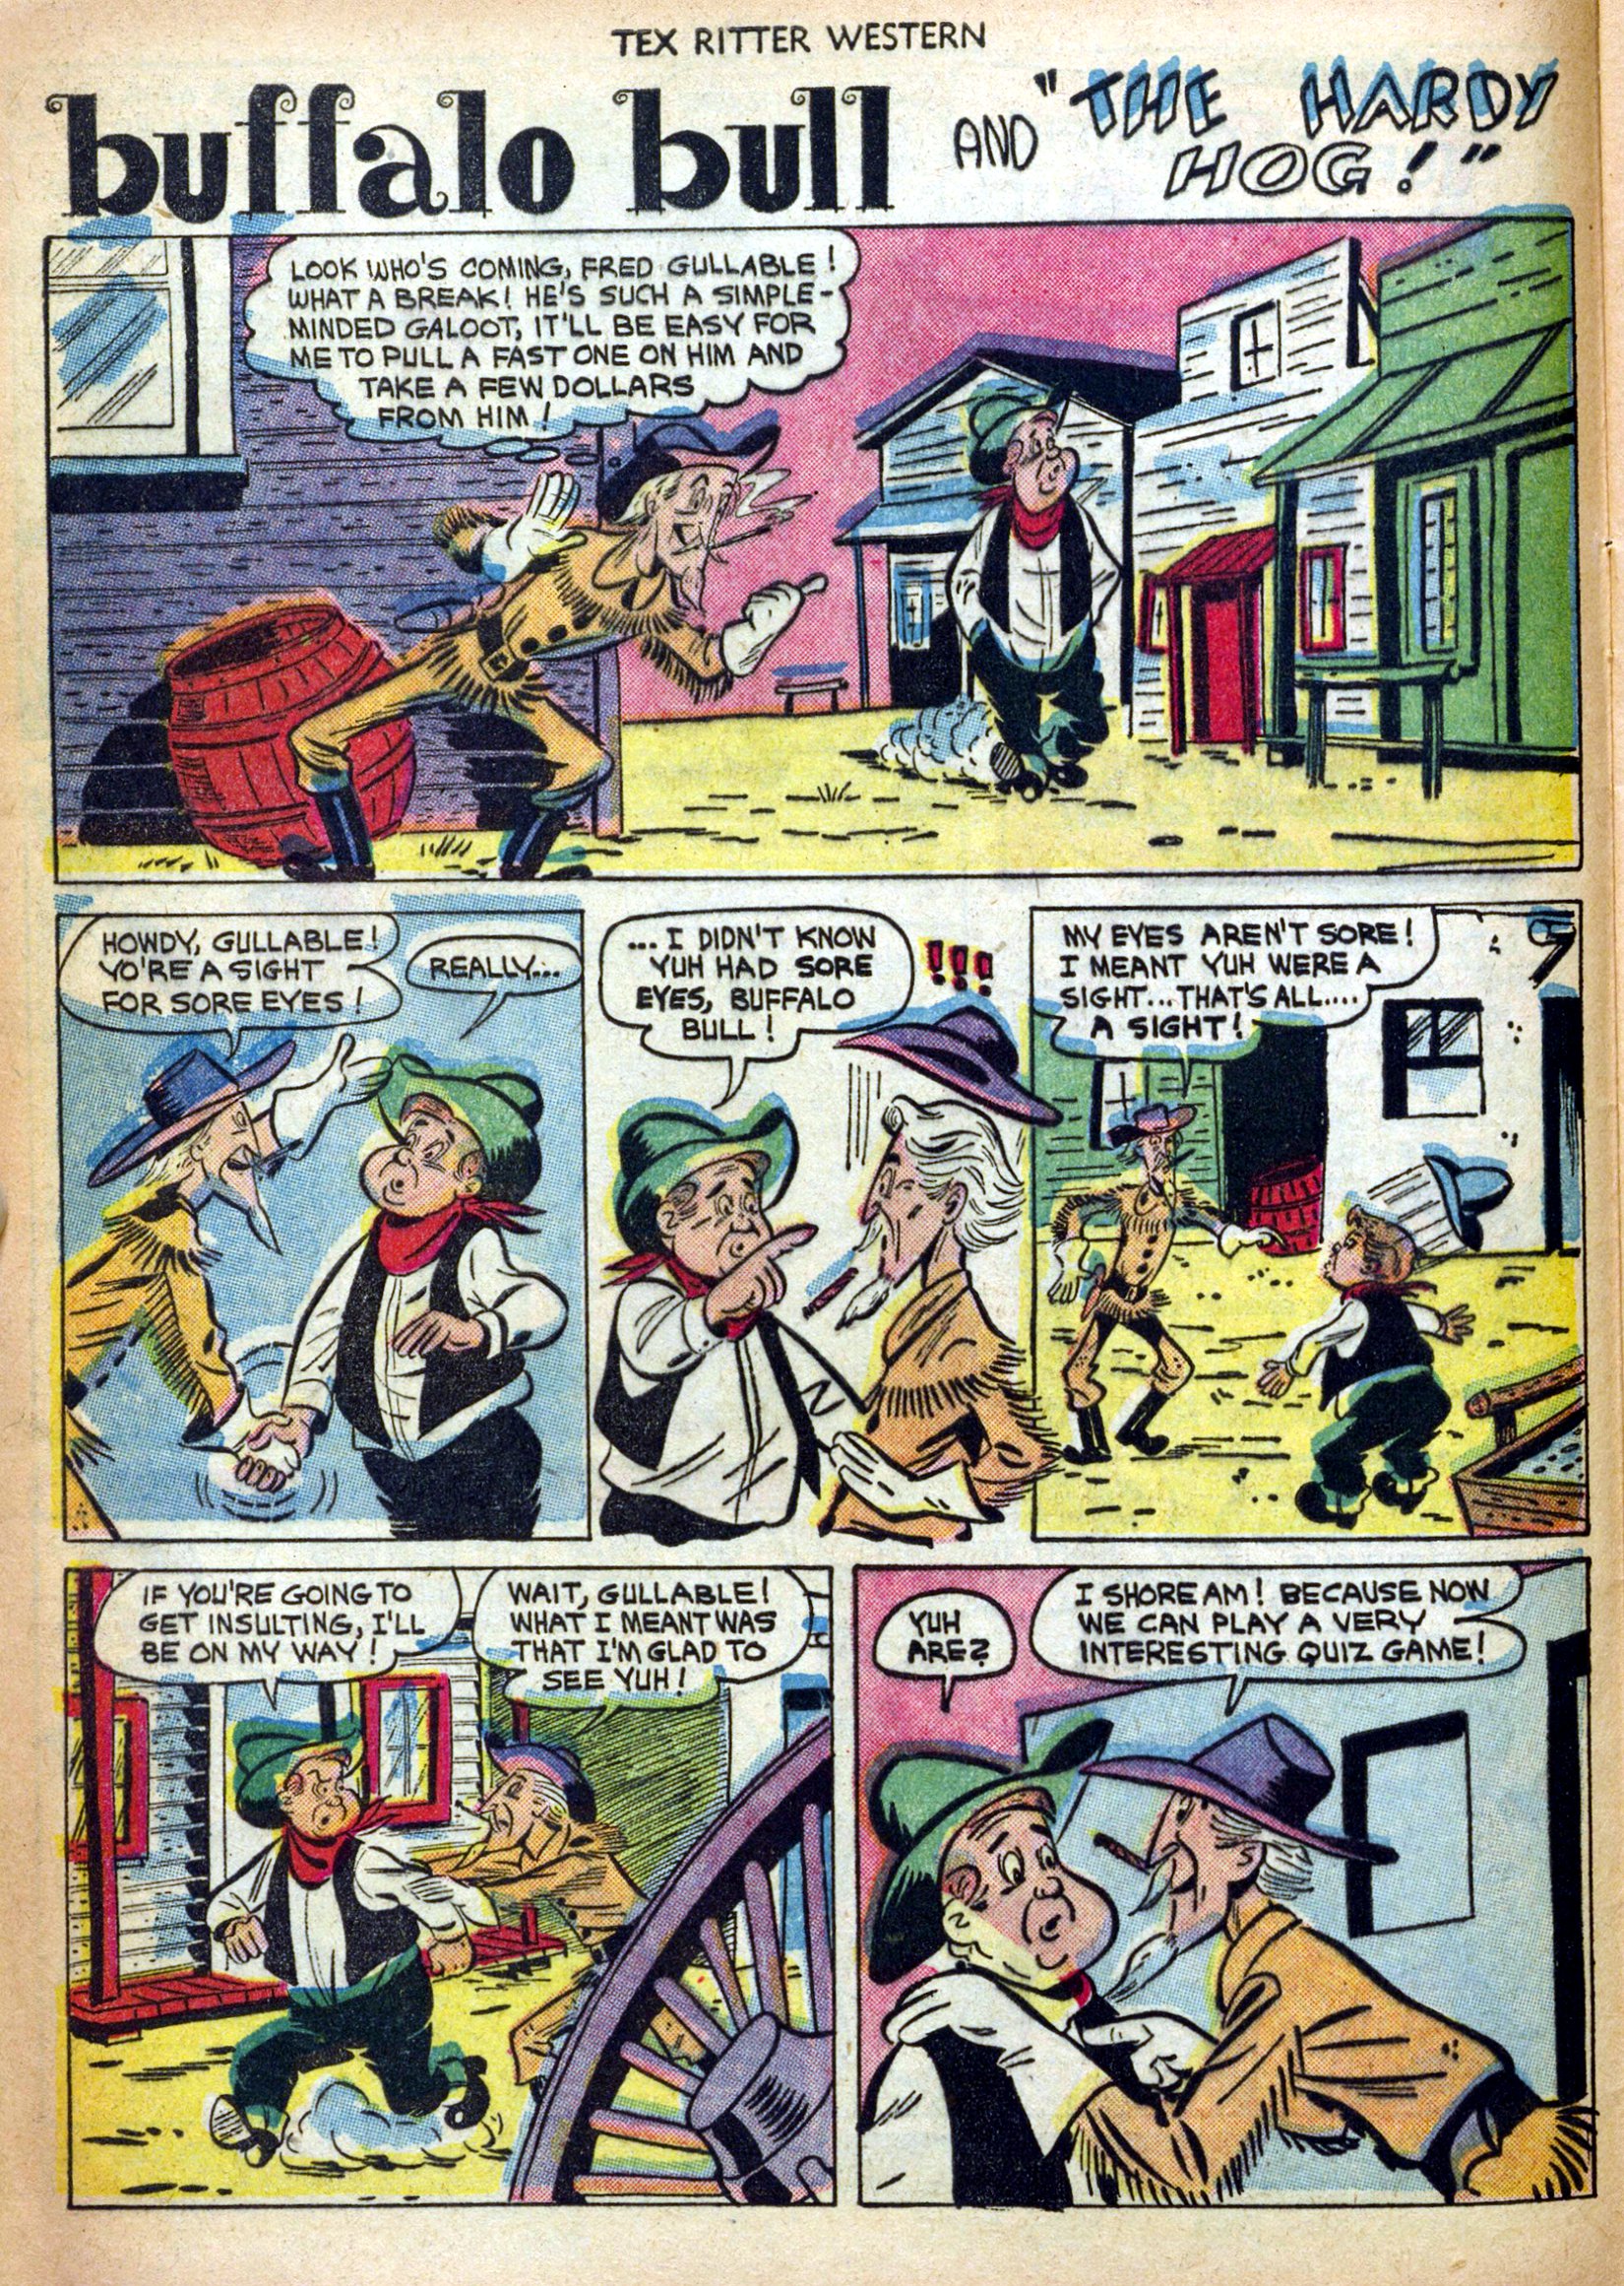 Read online Tex Ritter Western comic -  Issue #12 - 12